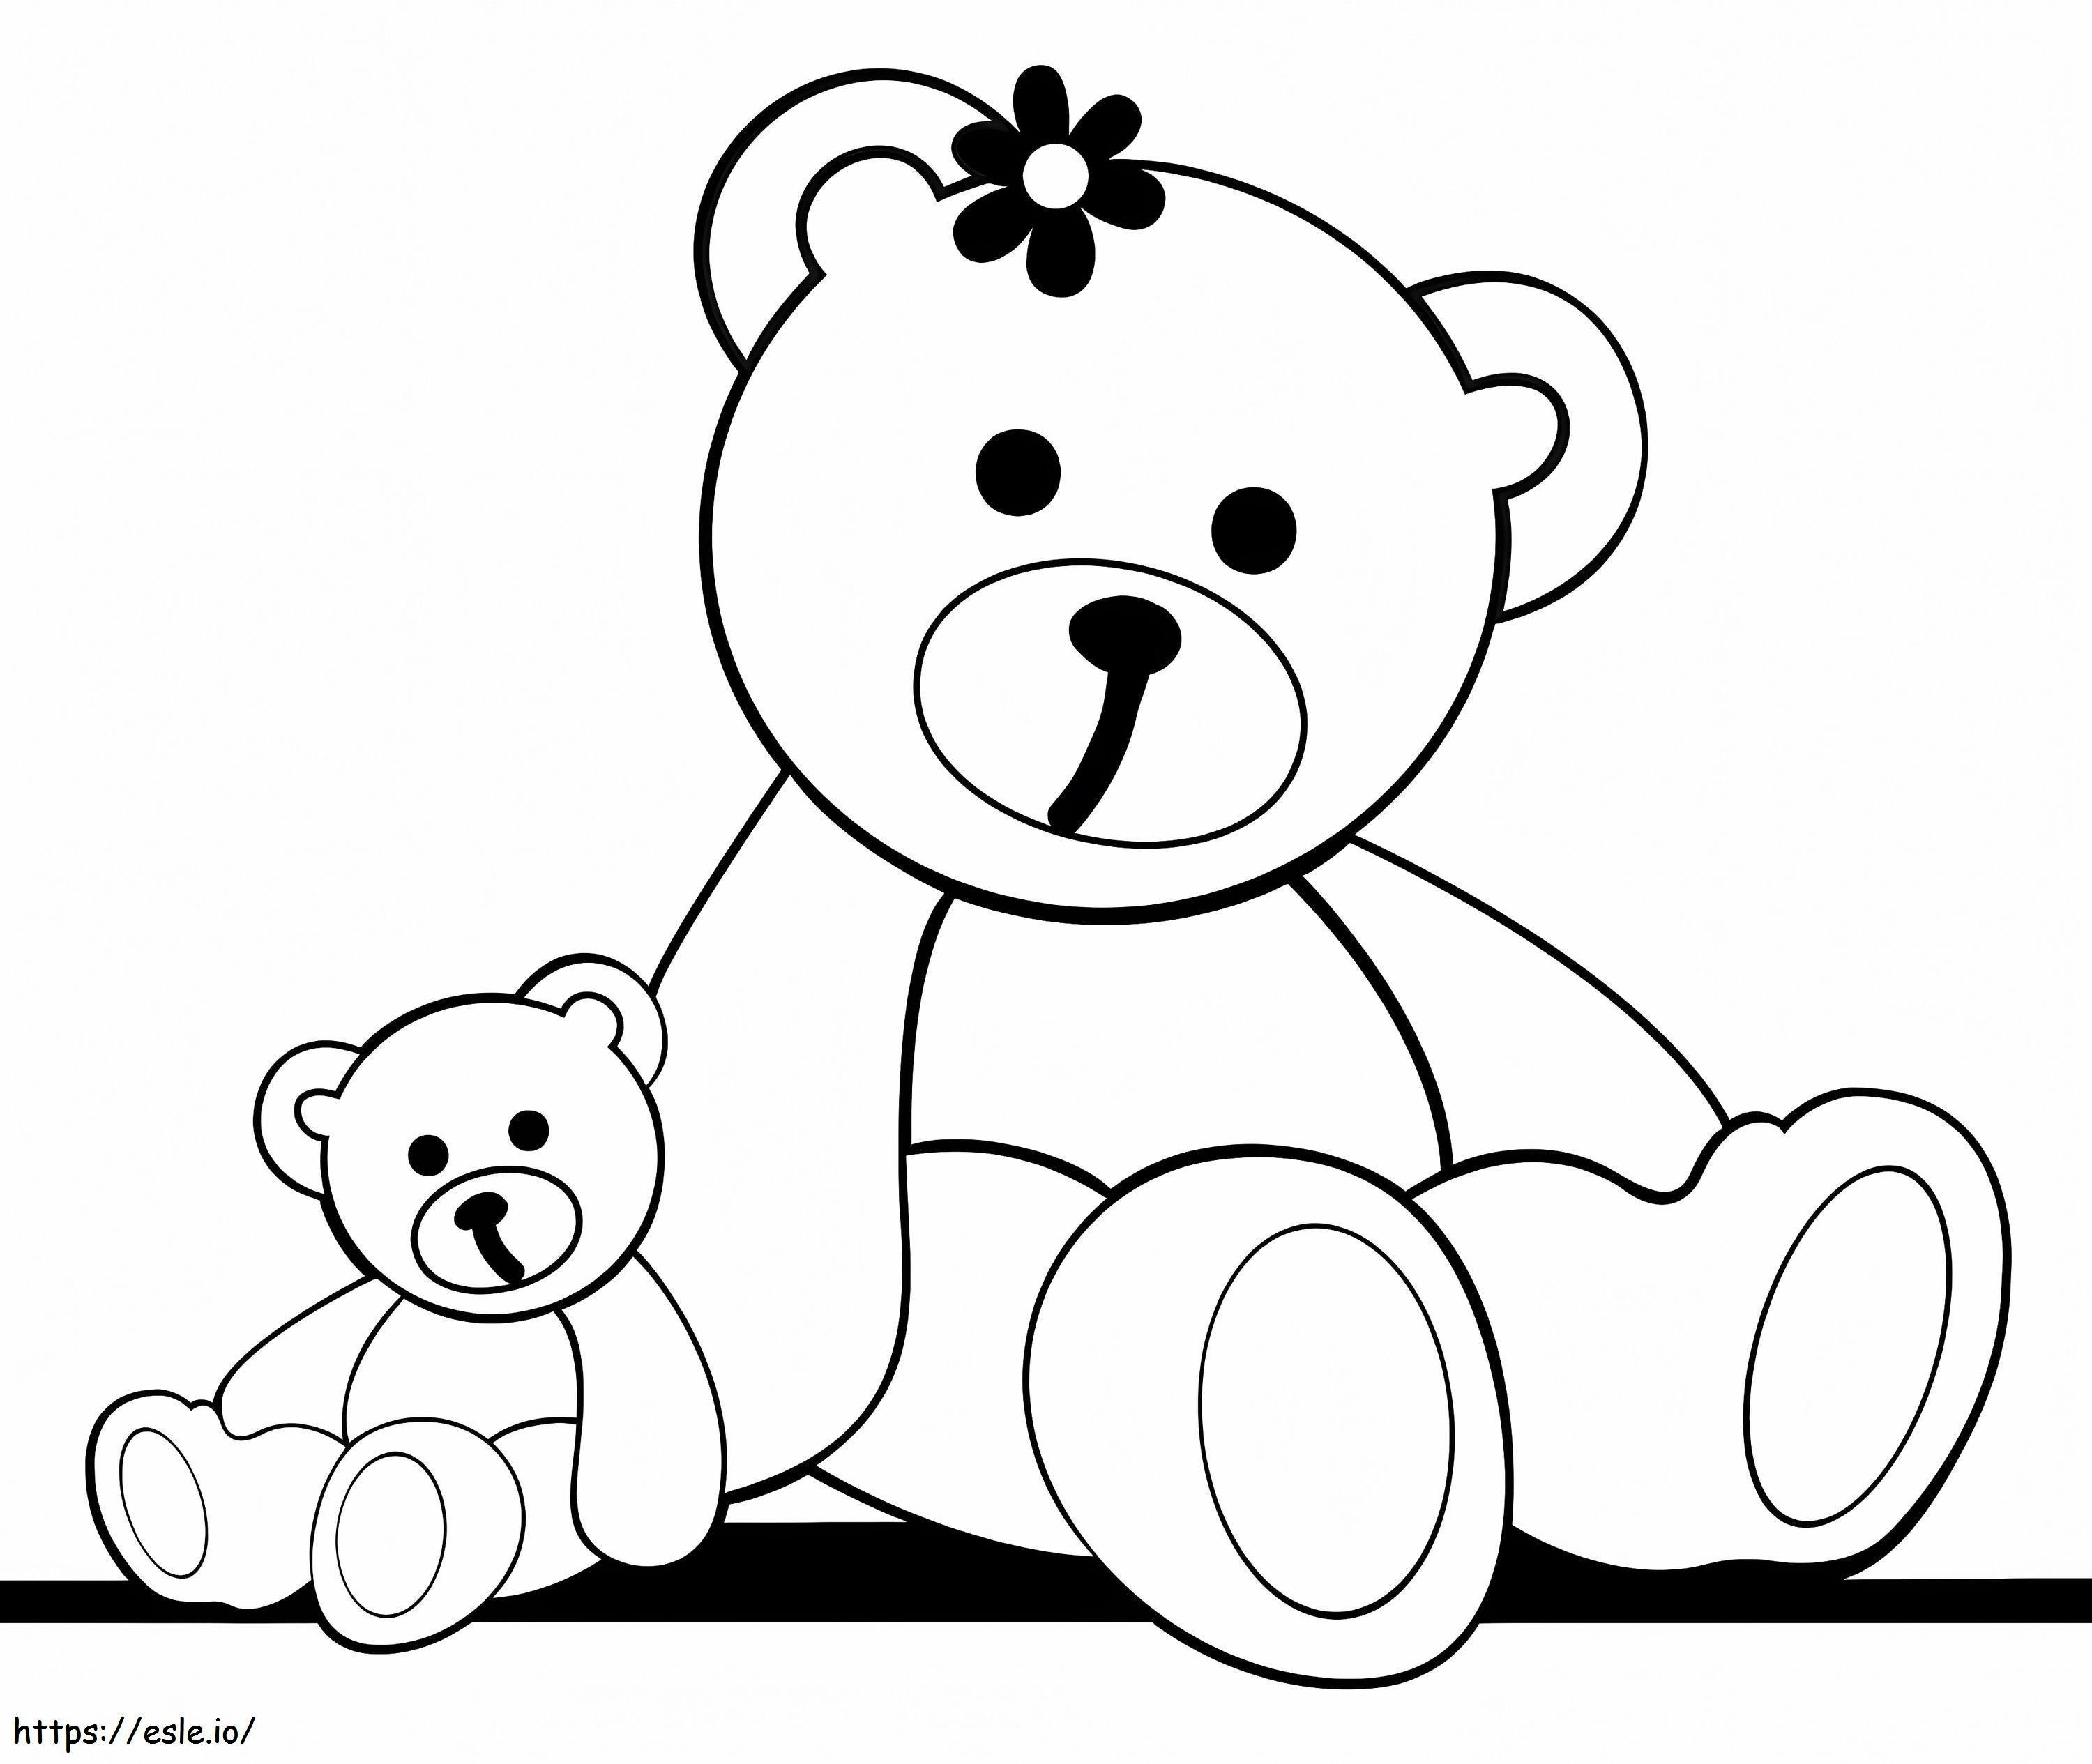 Teddy Bears coloring page